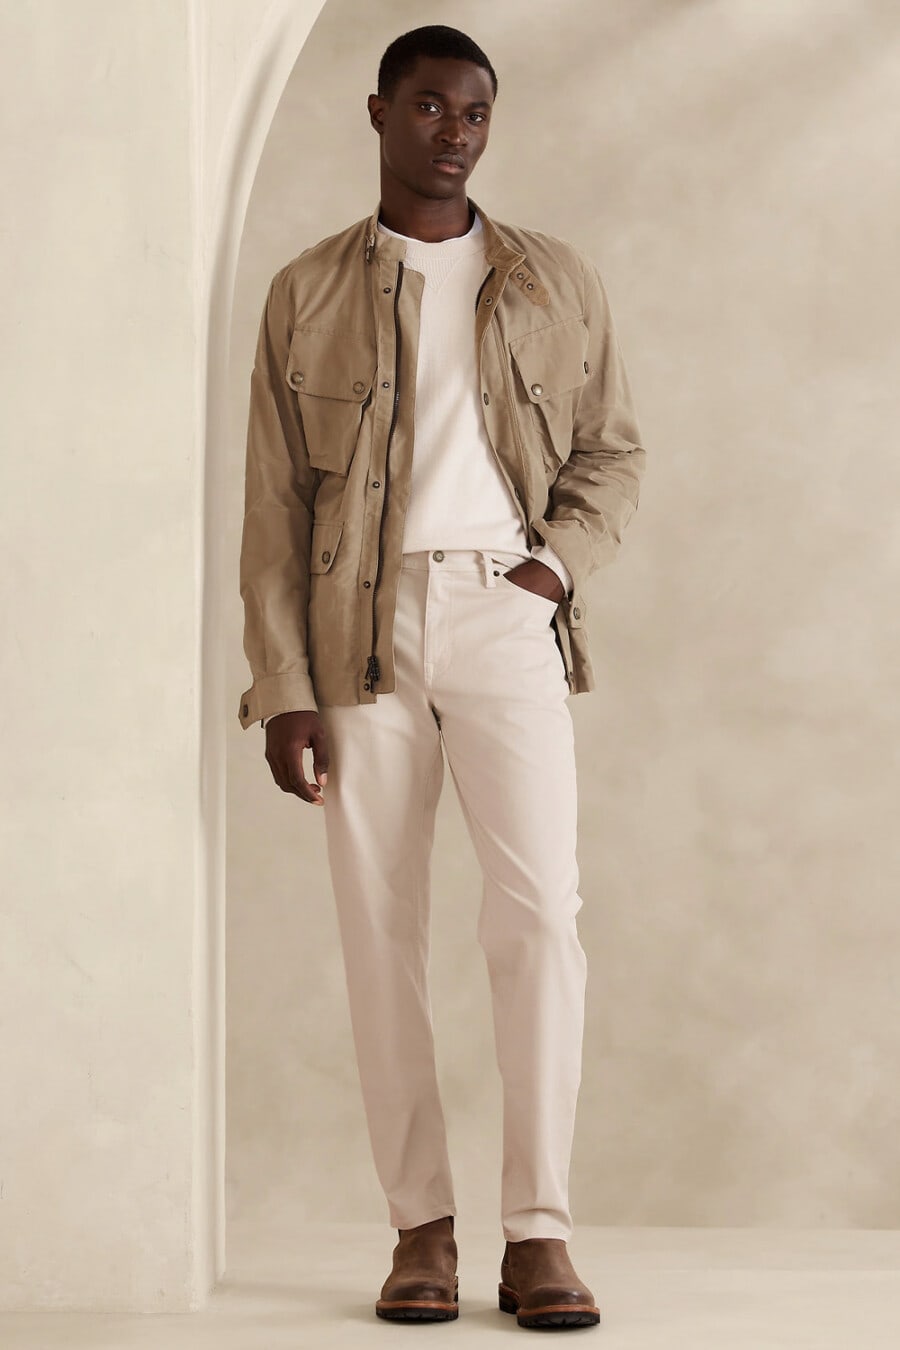 Men's cream pants, white long sleeve top, khaki field jacket and brown leather Chelsea boots outfit